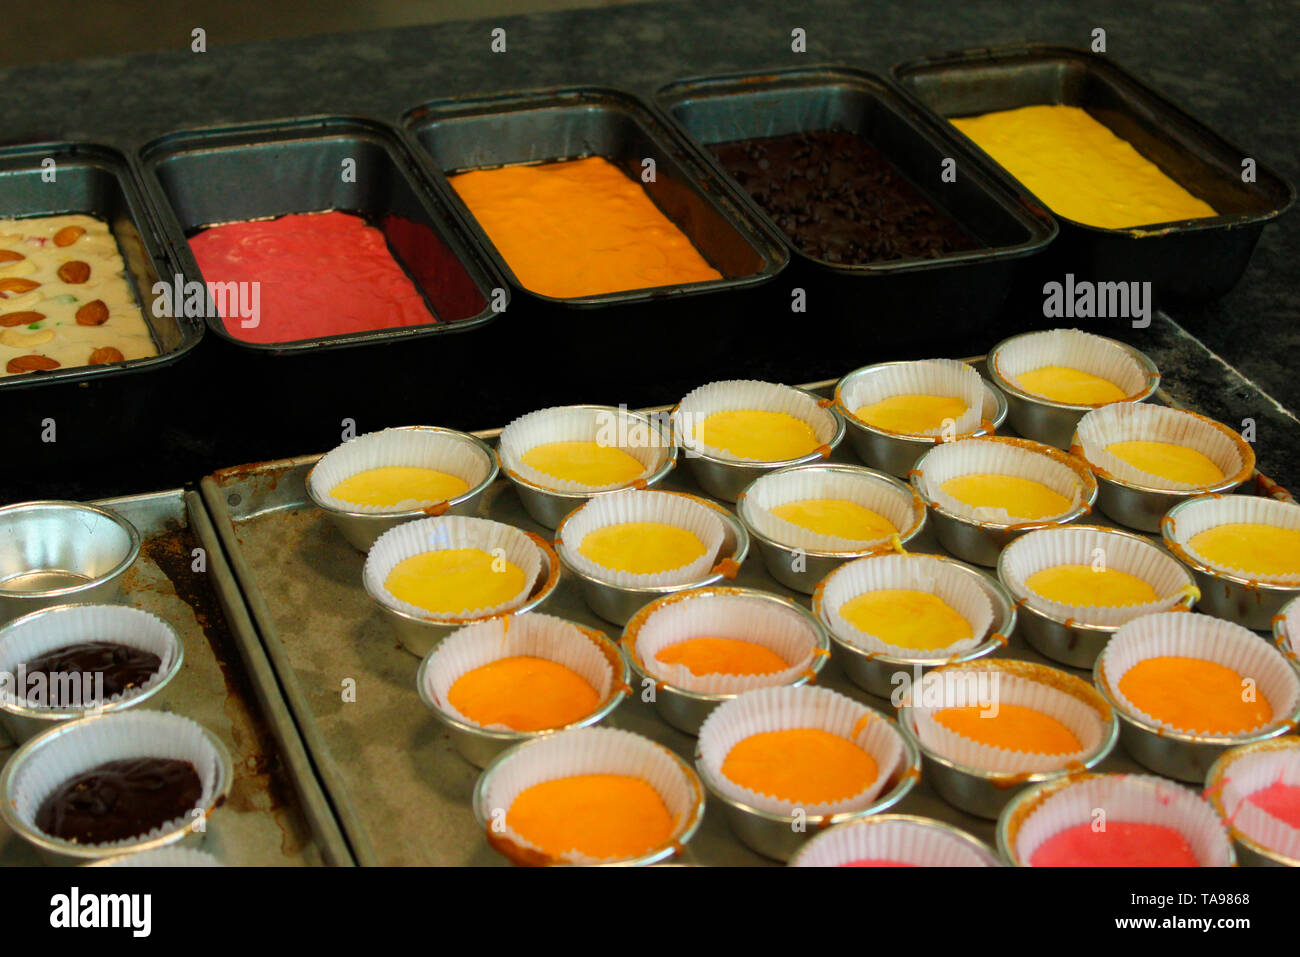 Cup cakes in different colours. Stock Photo